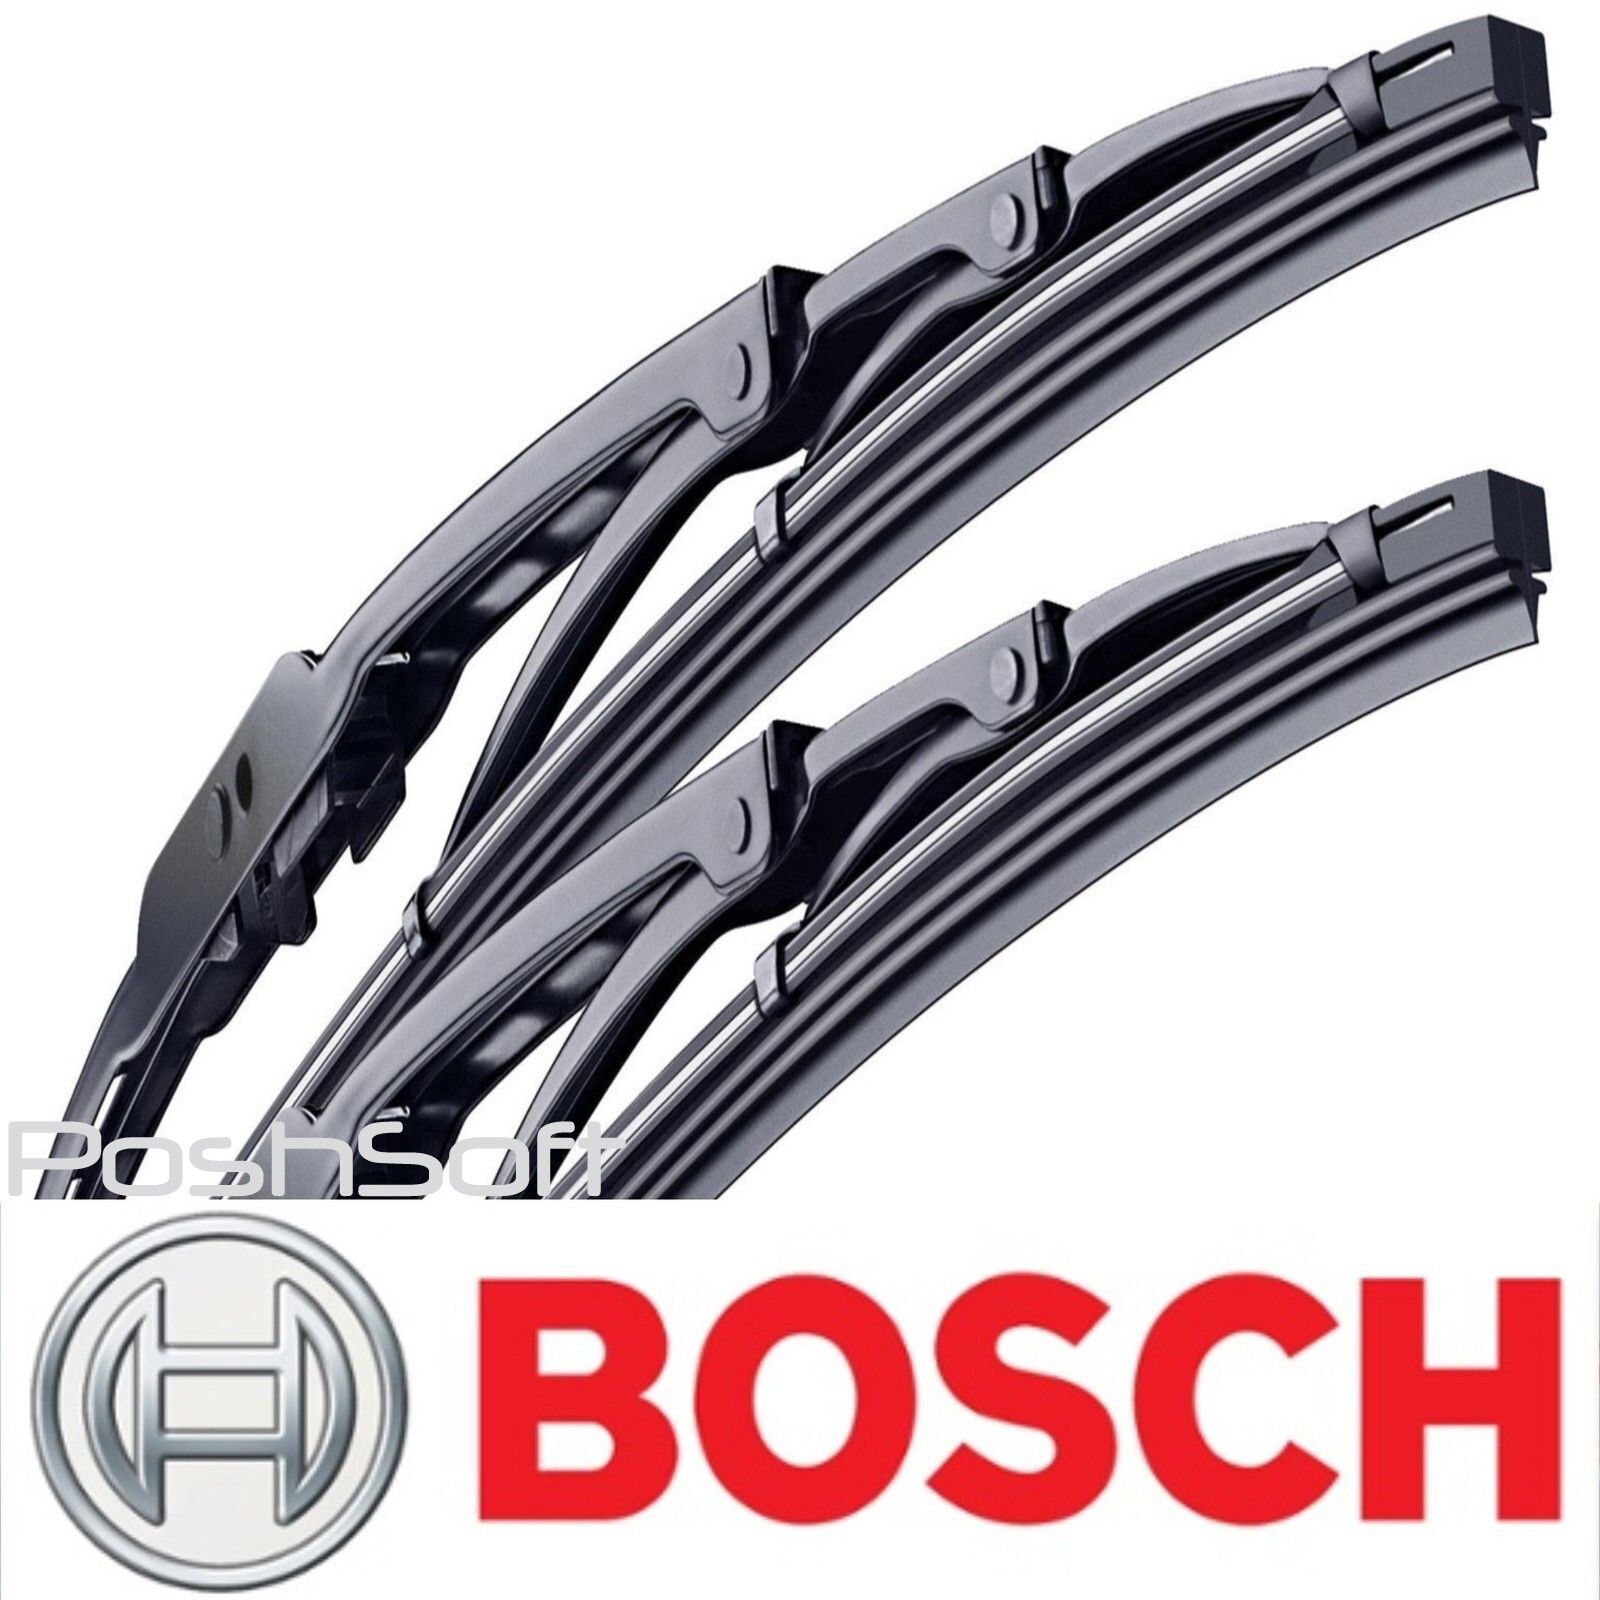 BOSCH DIRECT CONNECT WIPER BLADES size 20 / 20 -Front Left and Right- (SET OF 2)